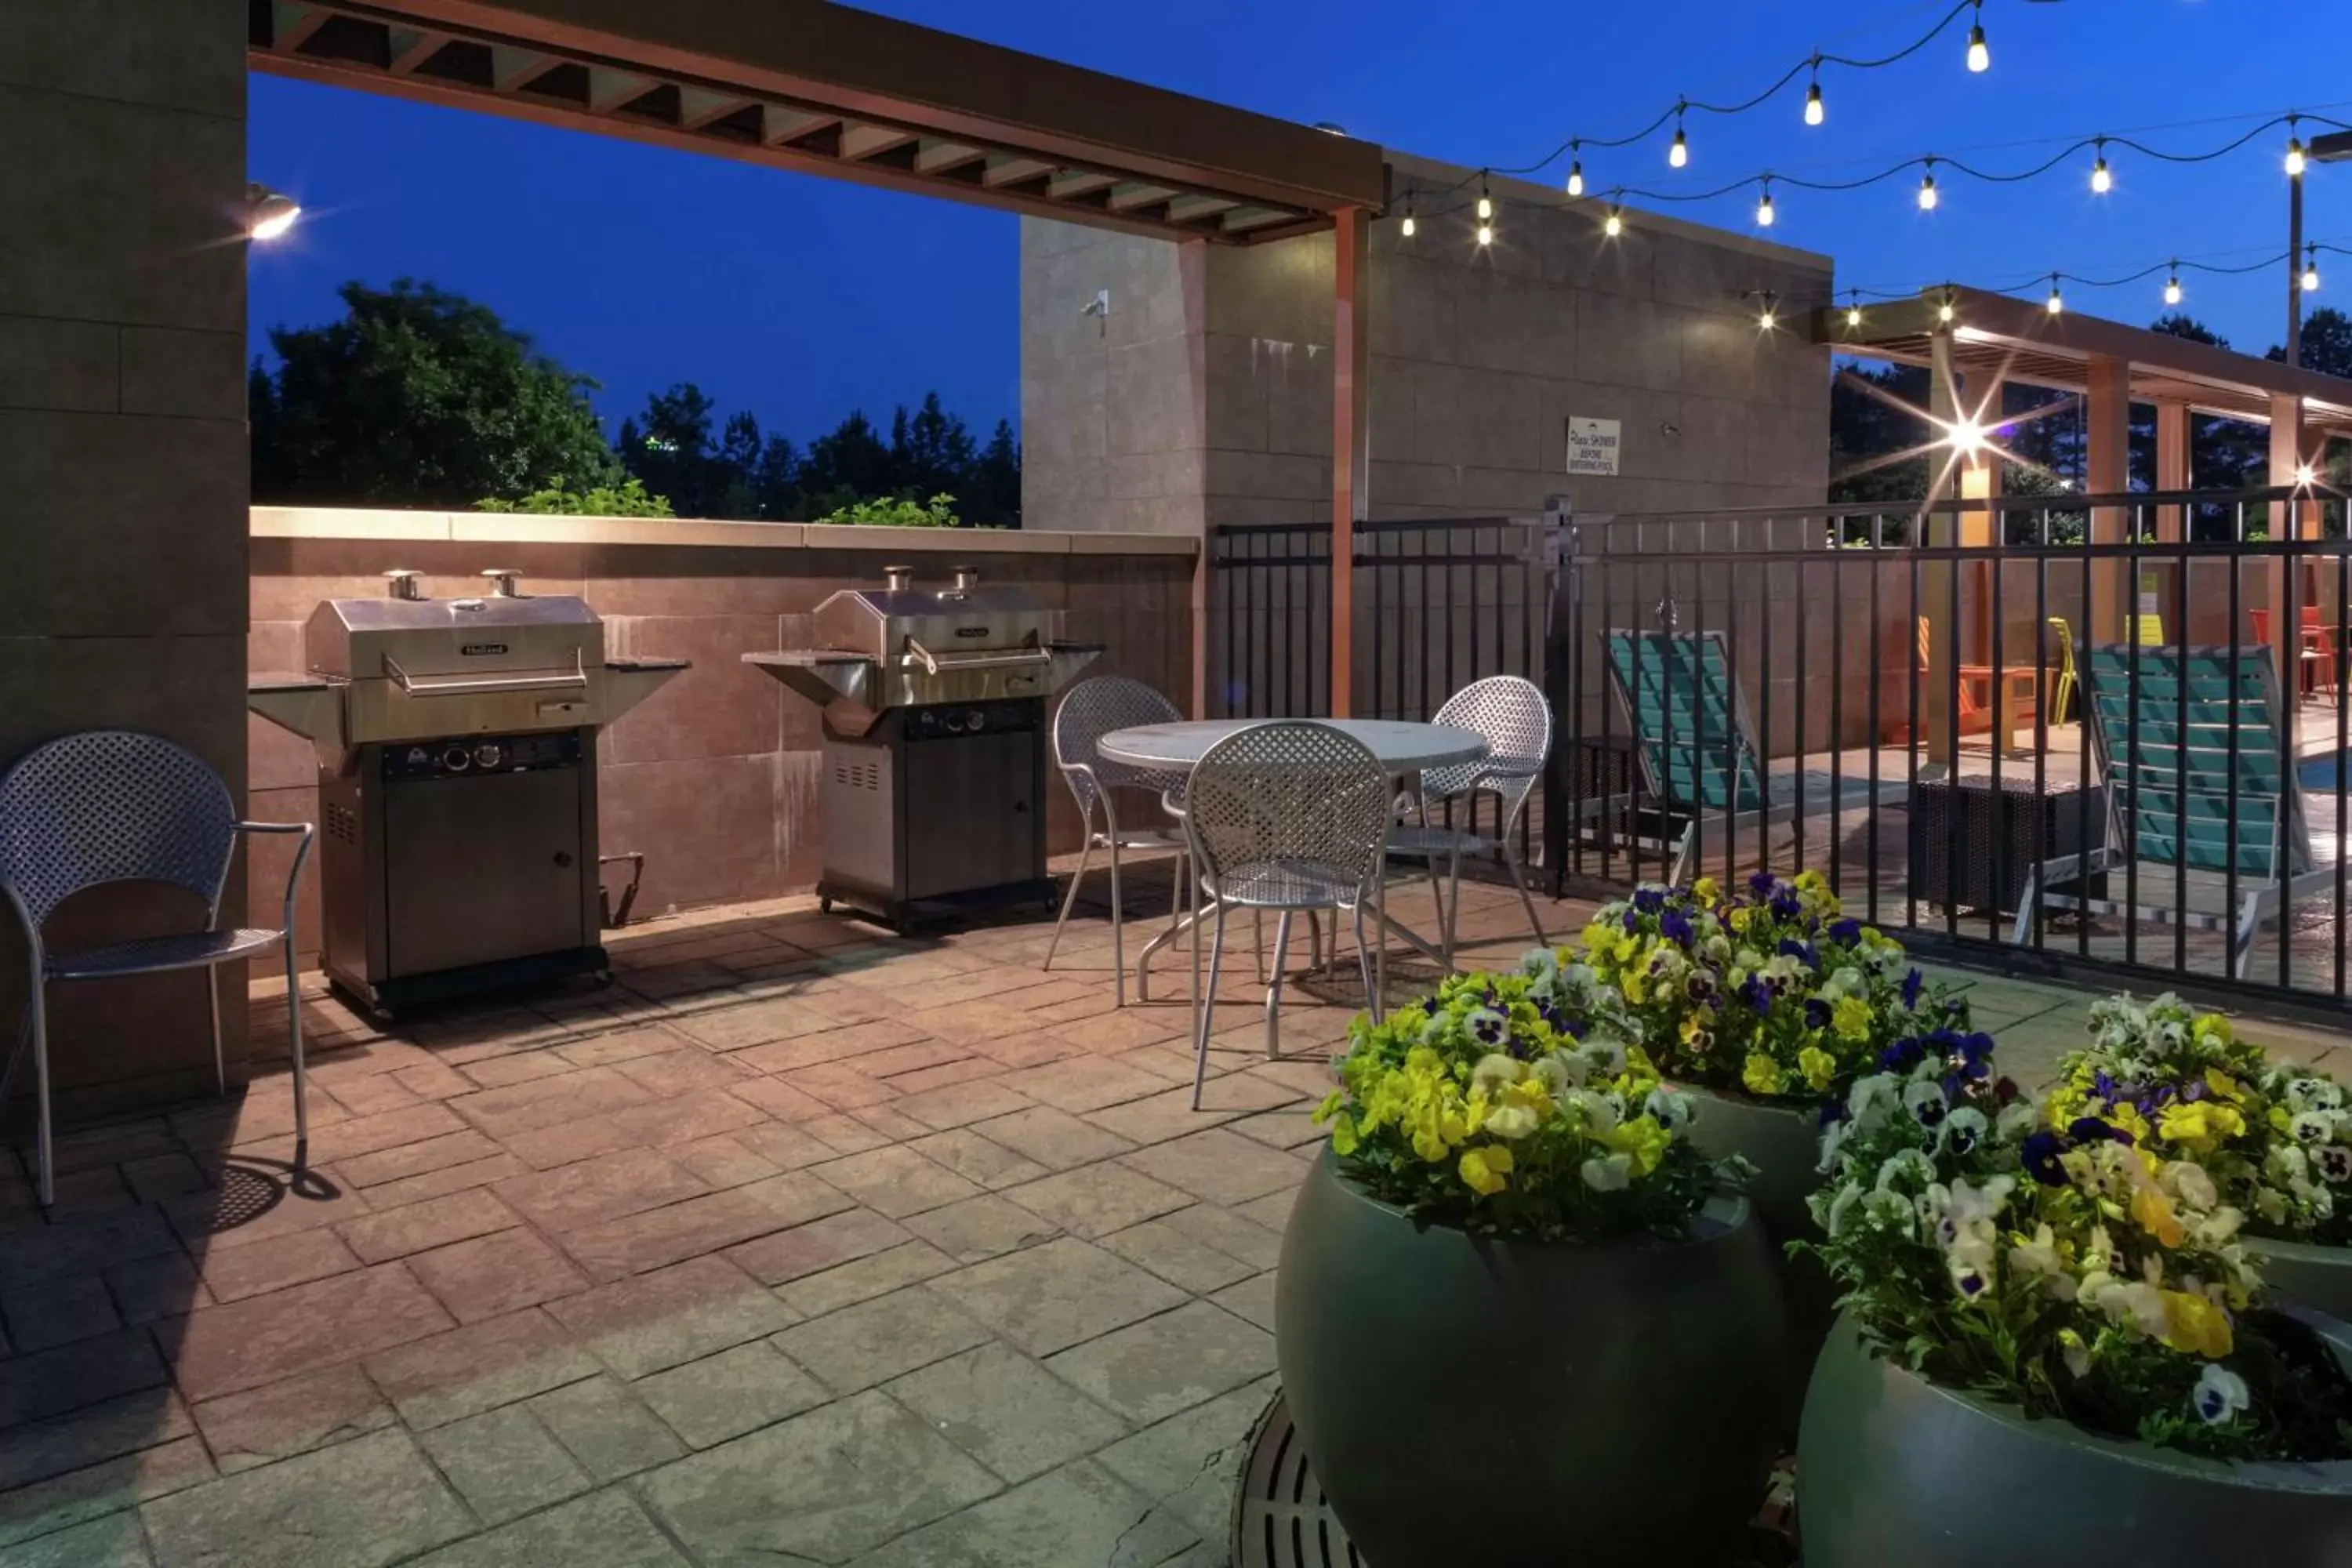 Patio, BBQ Facilities in Home2 Suites by Hilton Fayetteville, NC